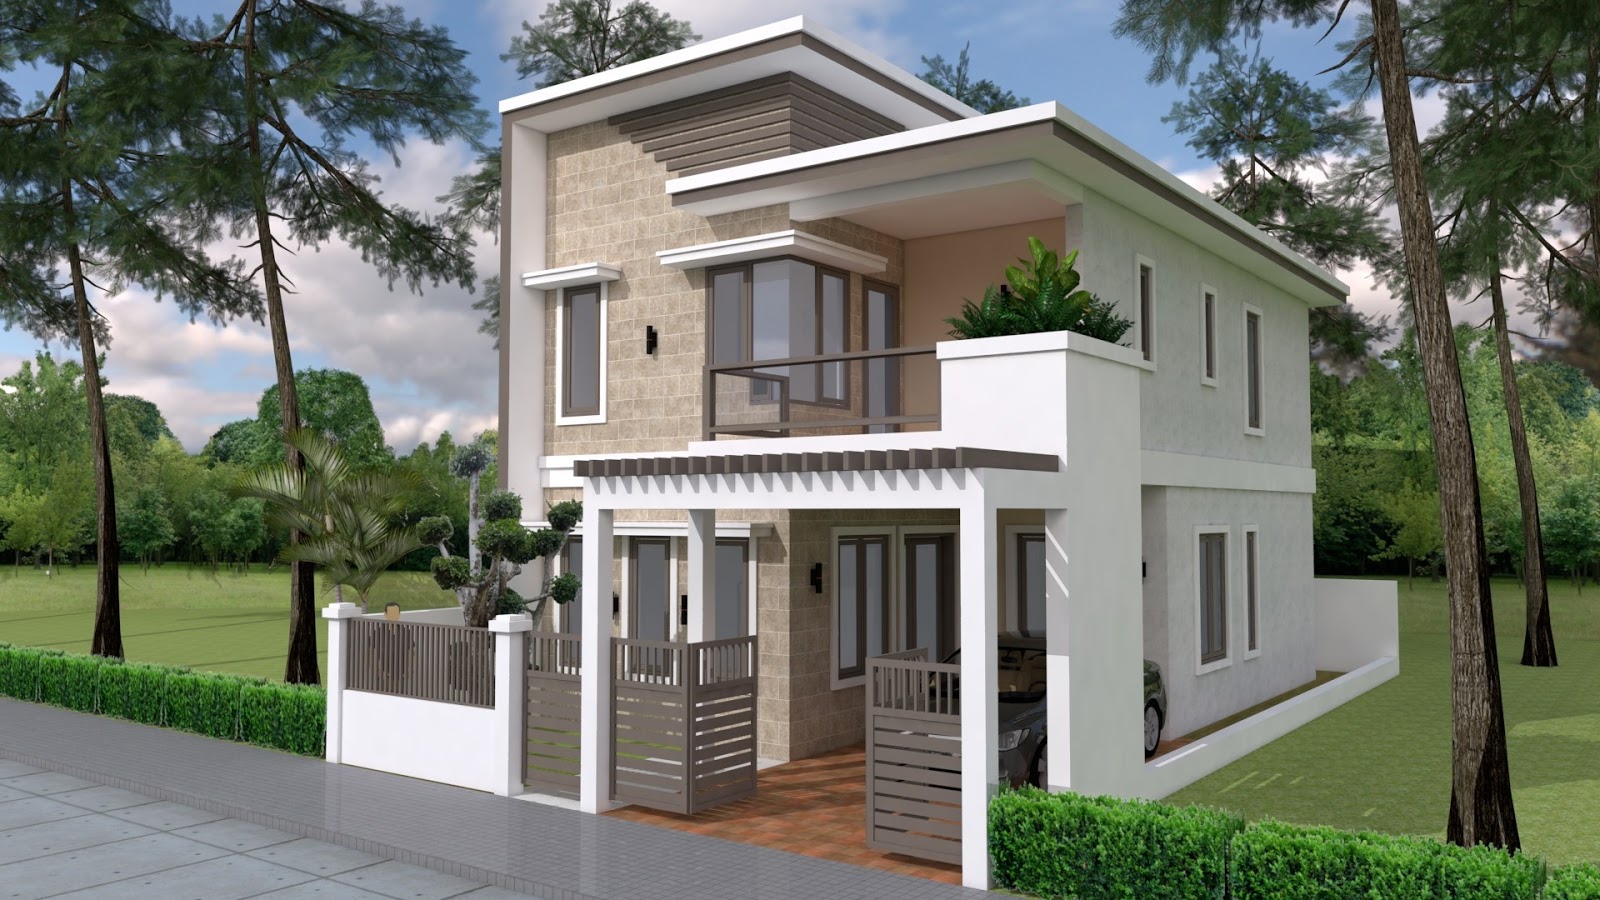 4 bedroom house plans indian style - Best House Plan Design